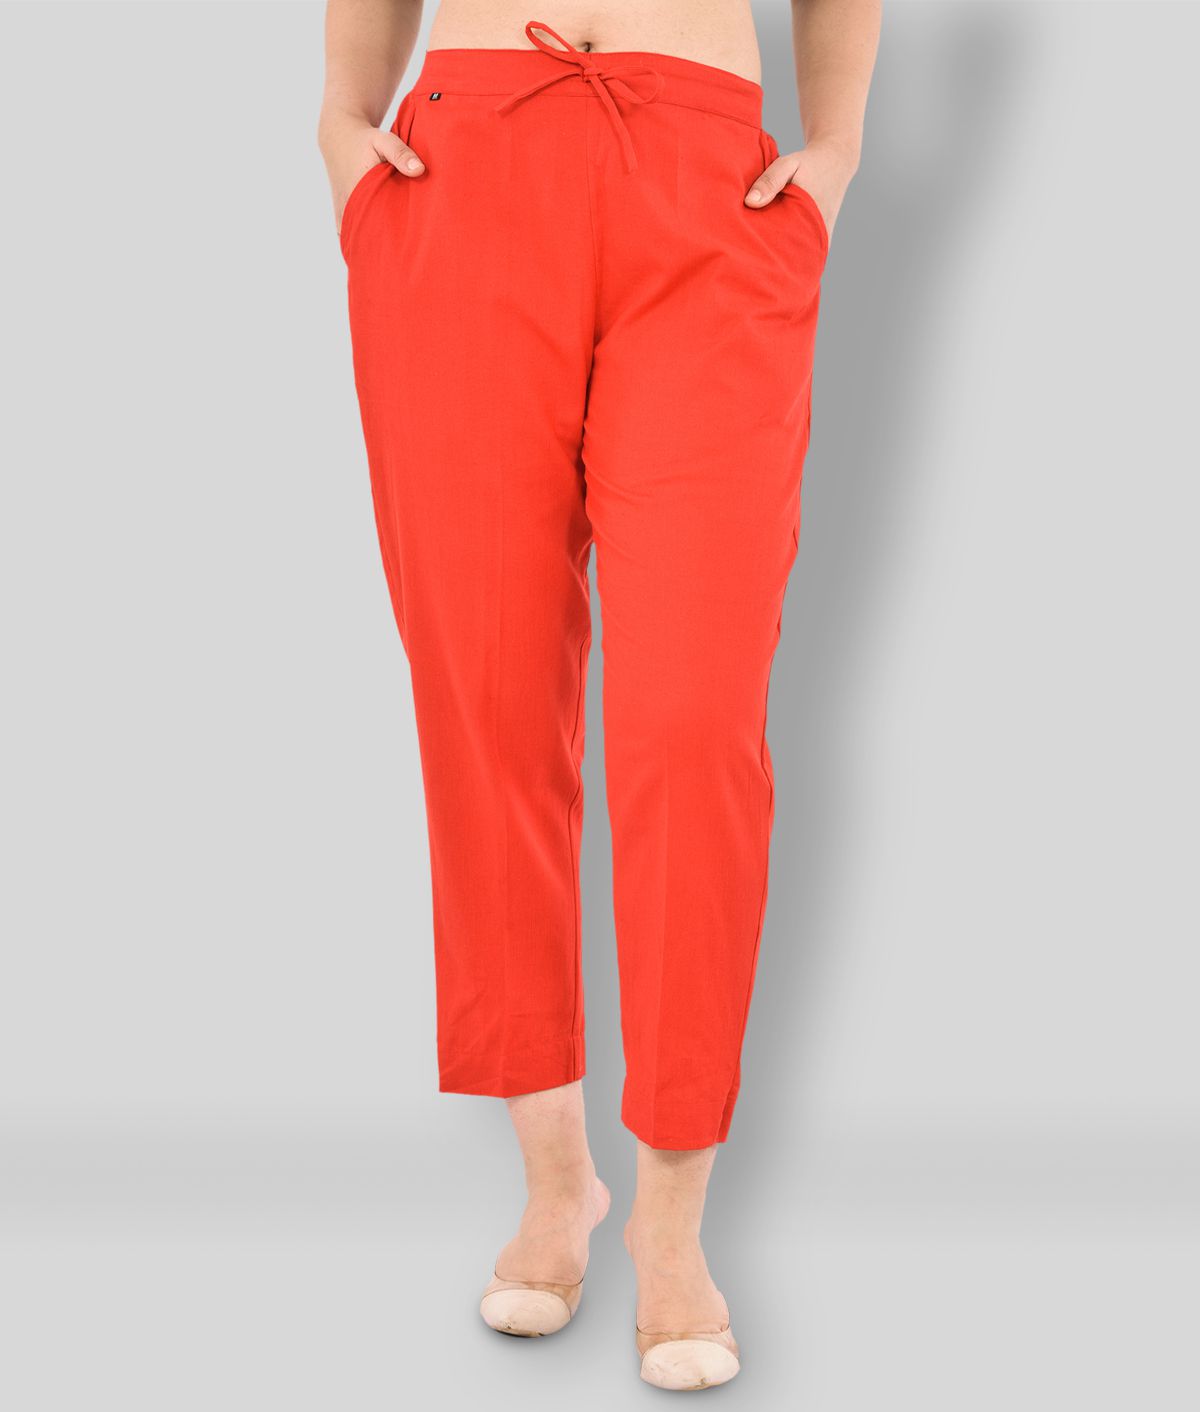     			FabMoon - Red Cotton Blend Straight Fit Women's Casual Pants  ( Pack of 1 )